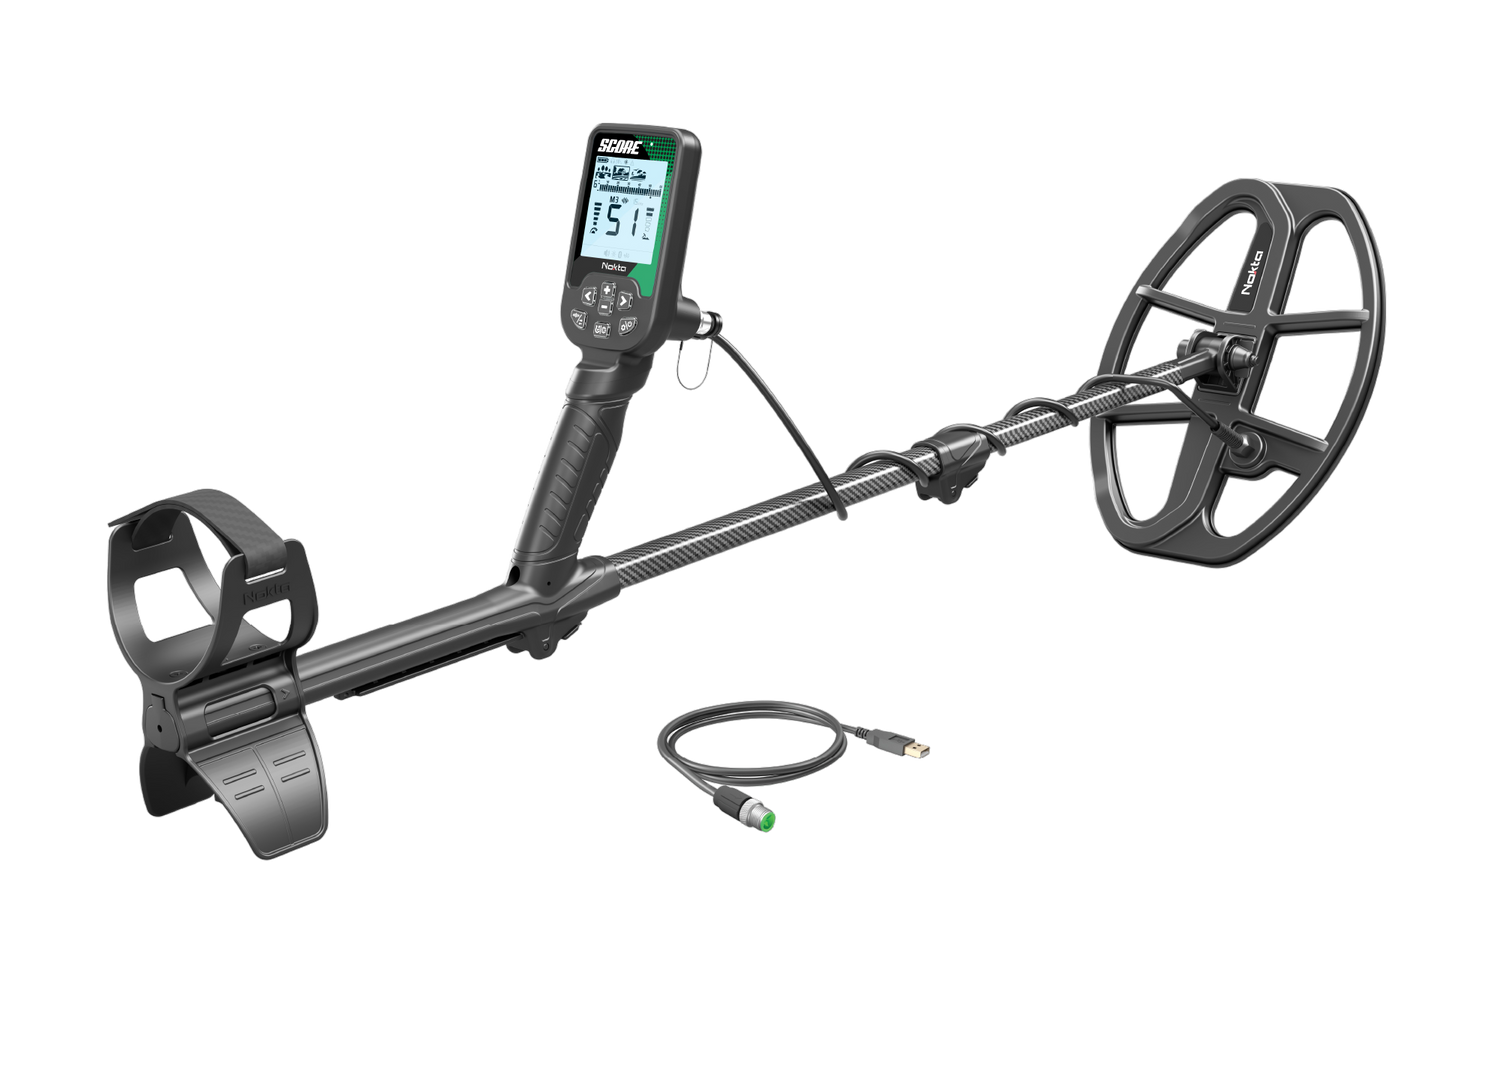 SCORE MULTI-FREQUENCY WATERPROOF METAL DETECTOR WITH 12X9 COIL